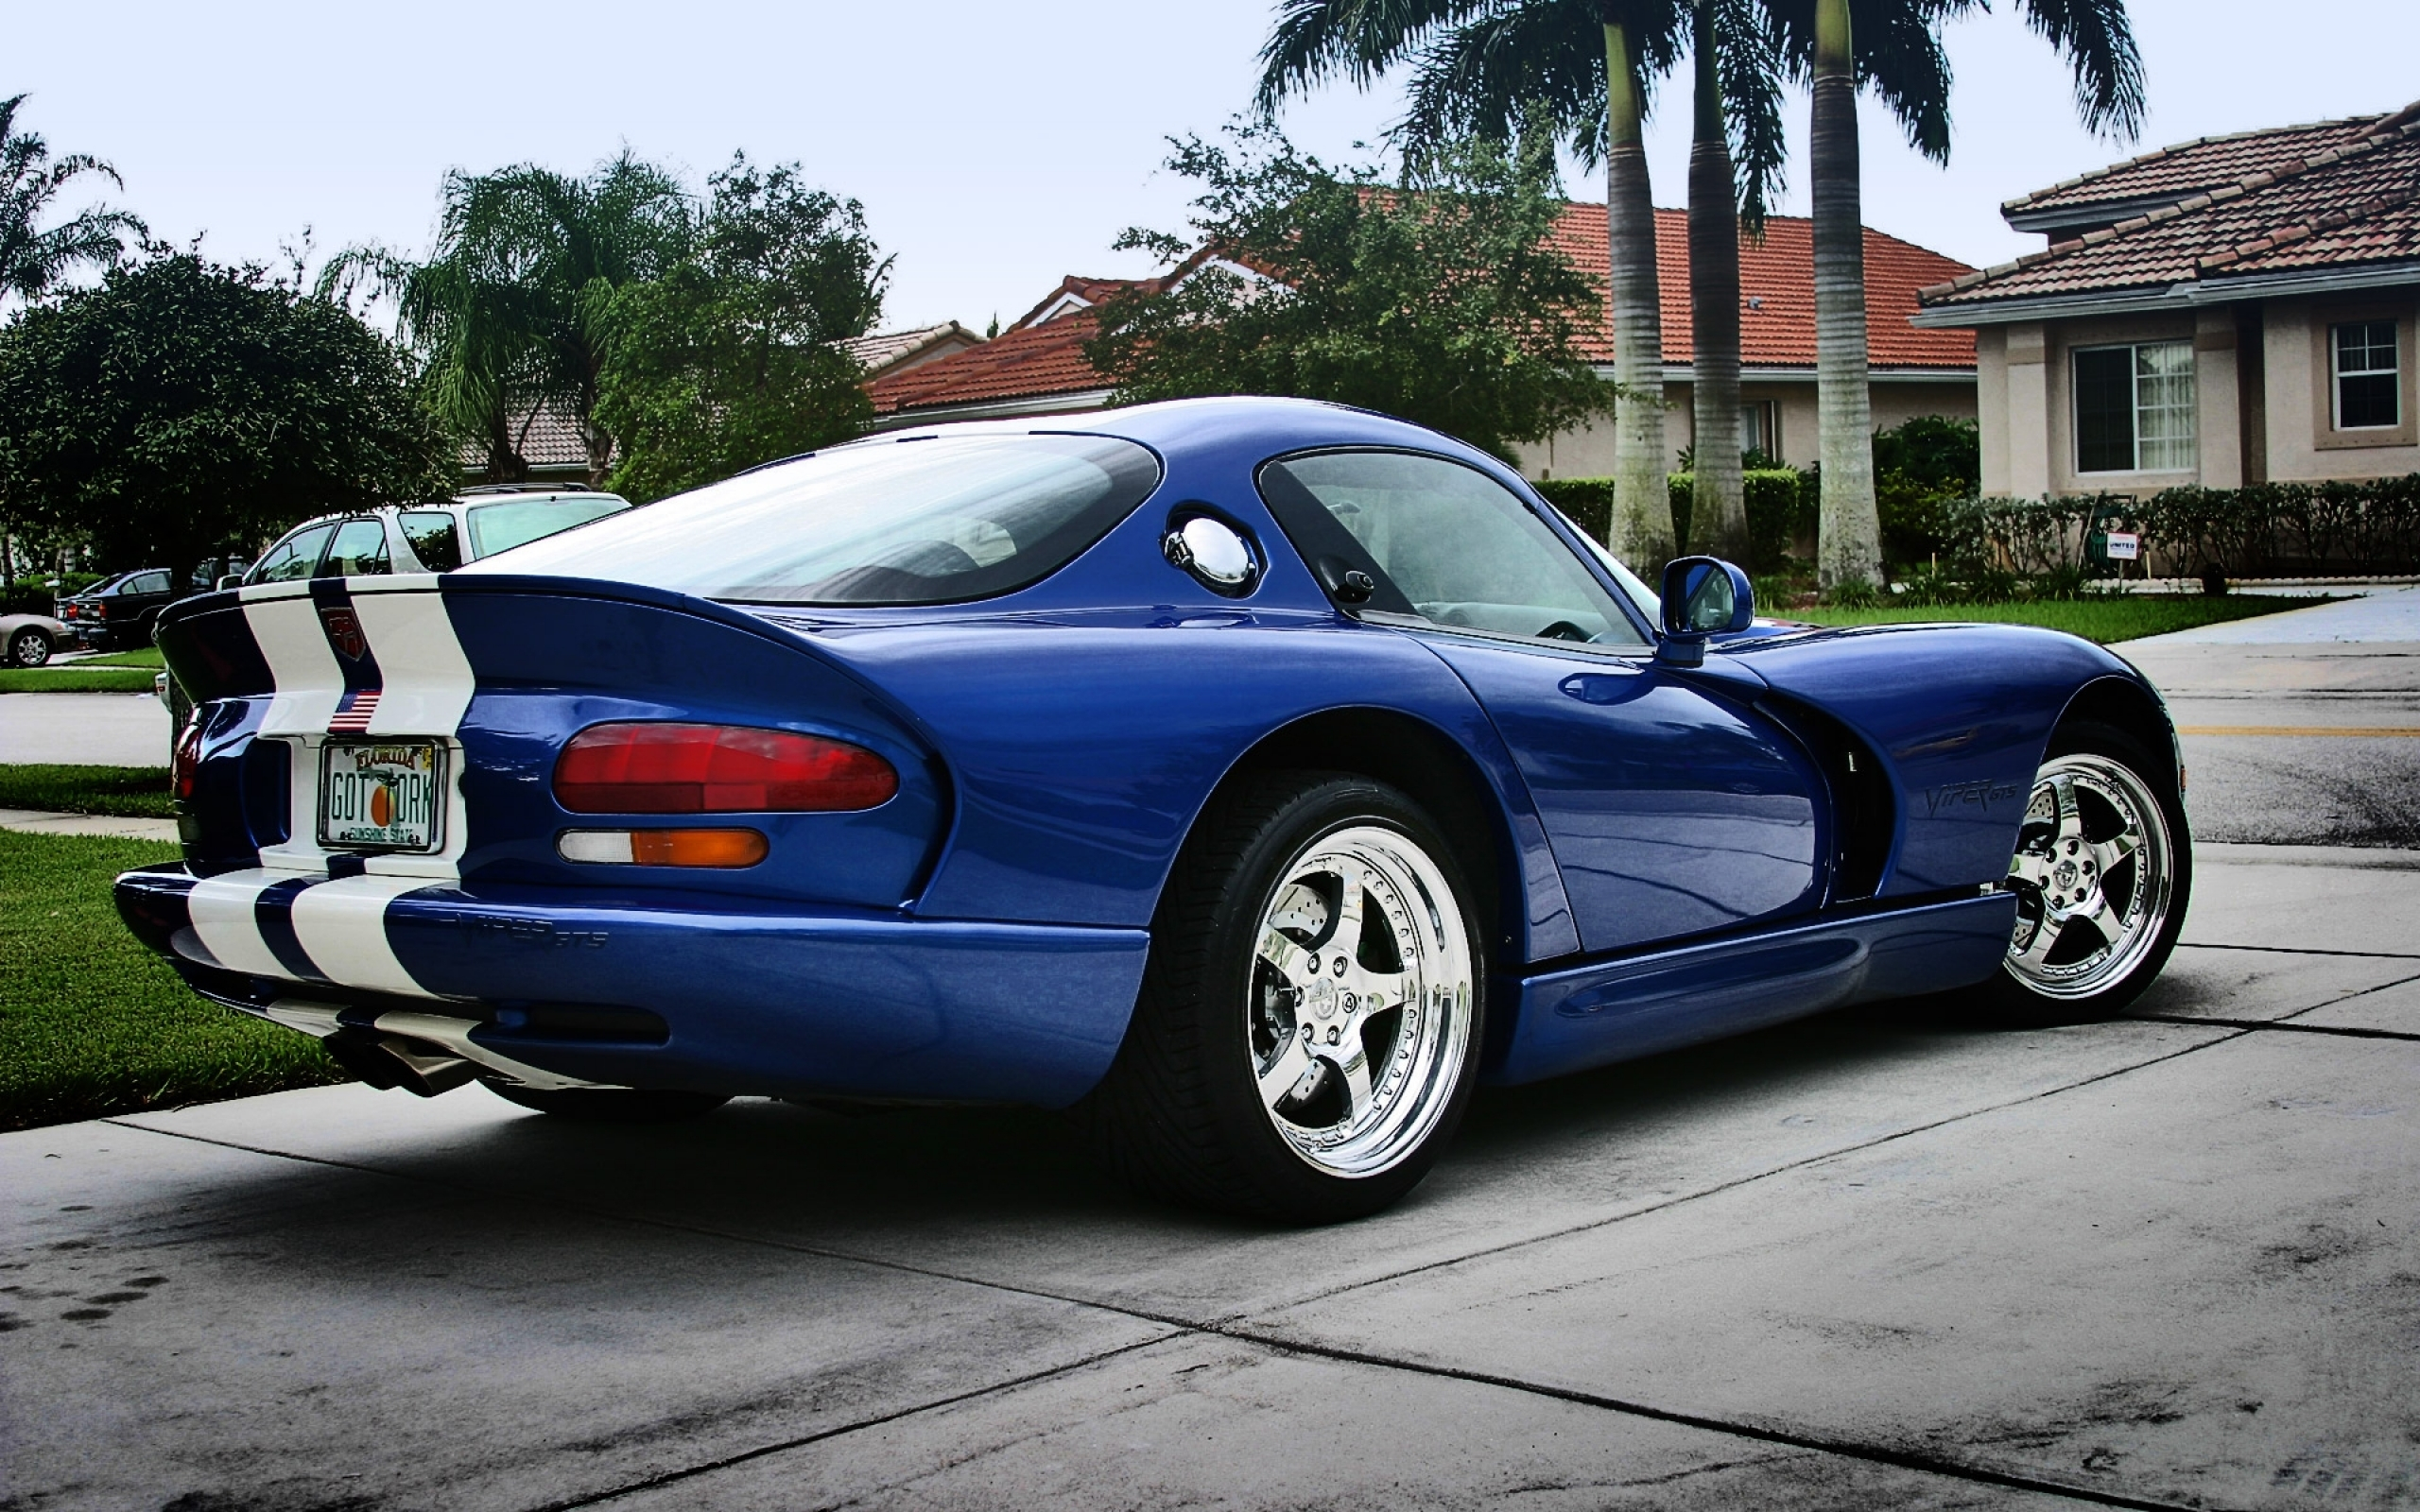 2560x1600 80+ Dodge Viper HD Wallpapers and Backgrounds